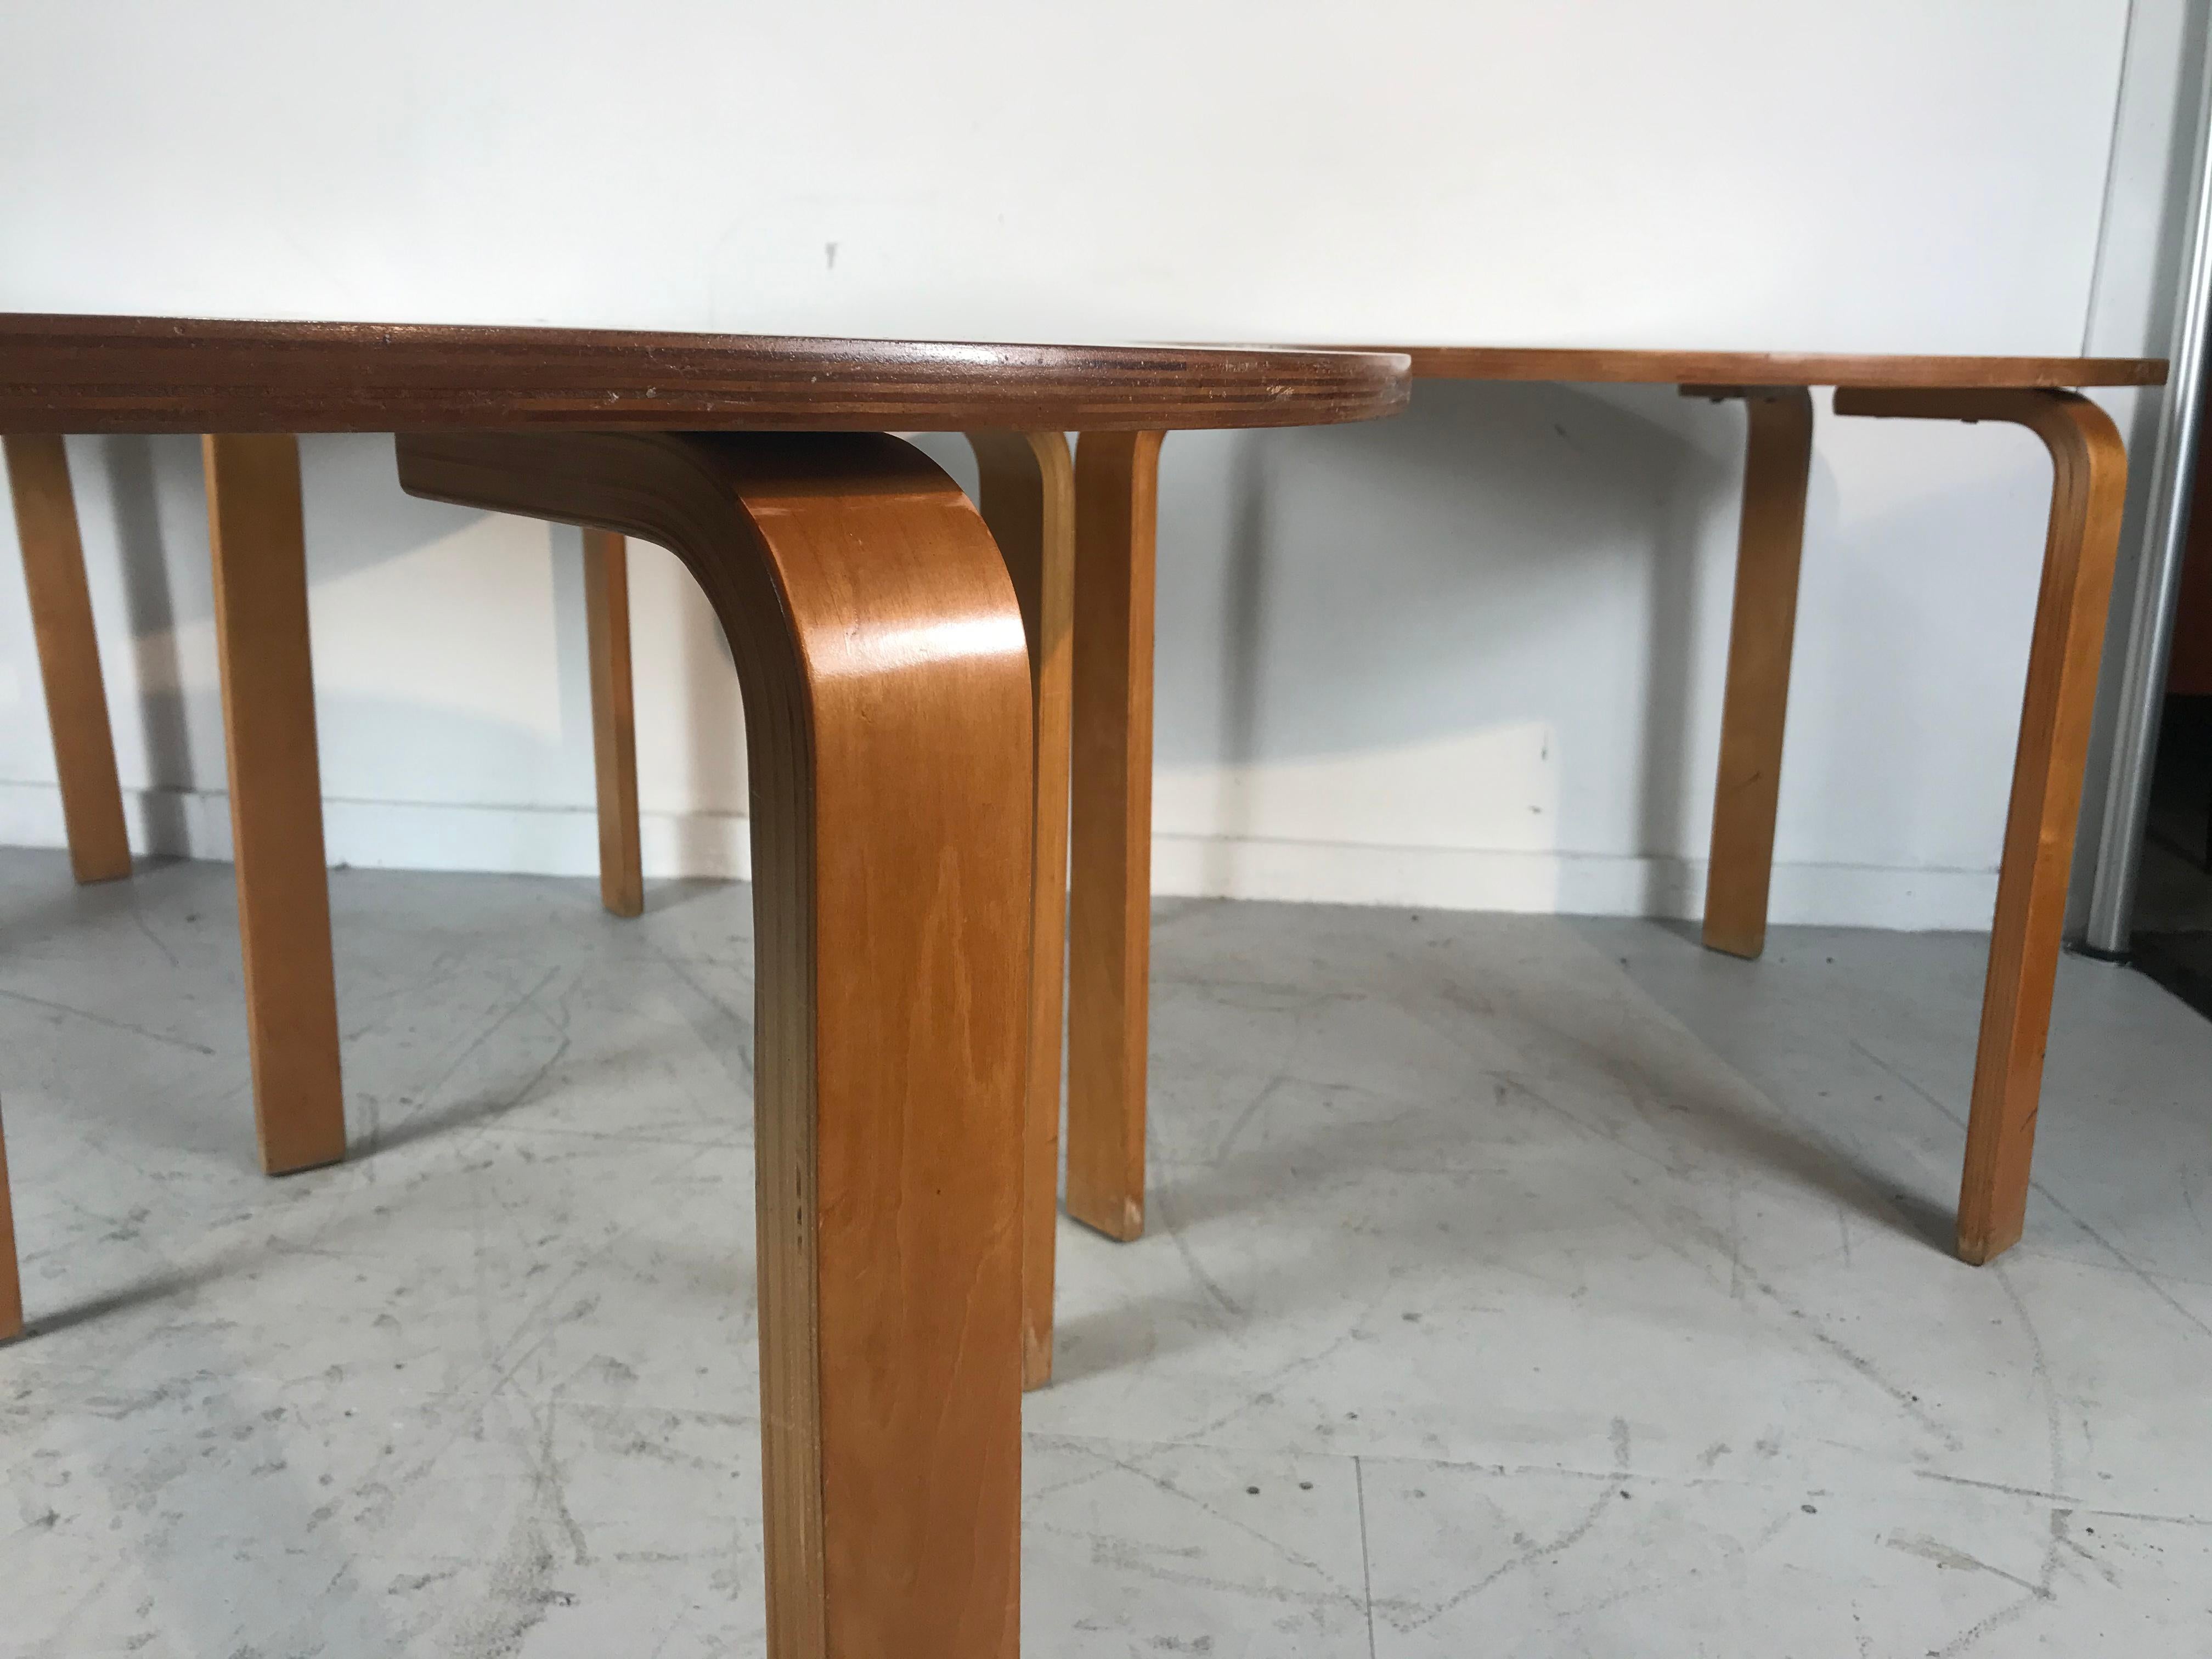 Laminated Classic Bent Plywood Bauhaus Style Dining Tables Attributed to Thonet